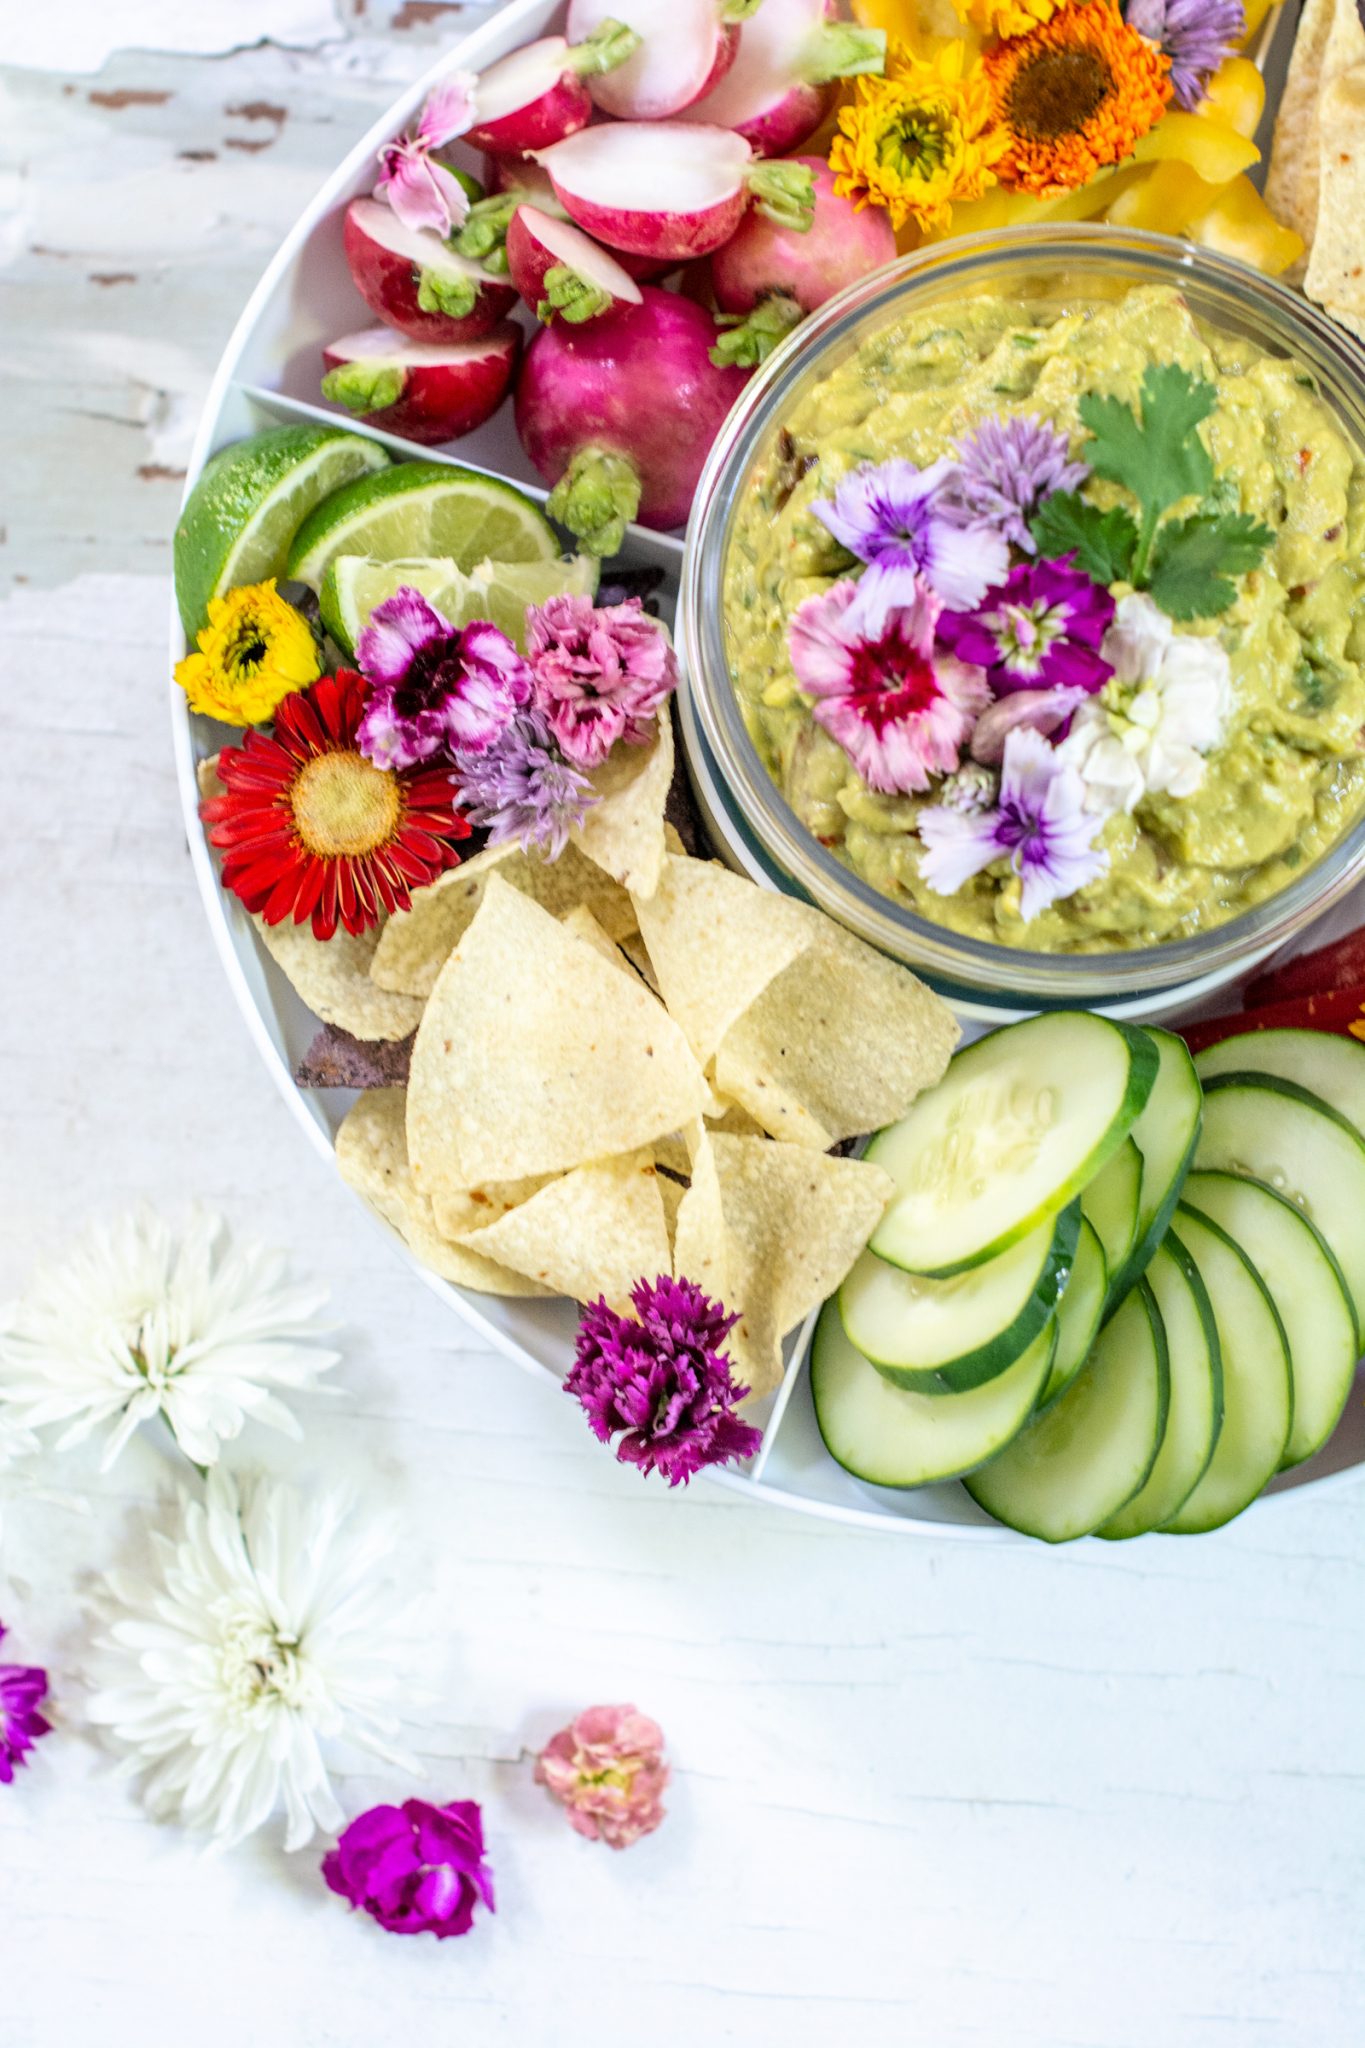 Fresh sliced vegetables surrounding a bowl of spicy guacamole on a white table.